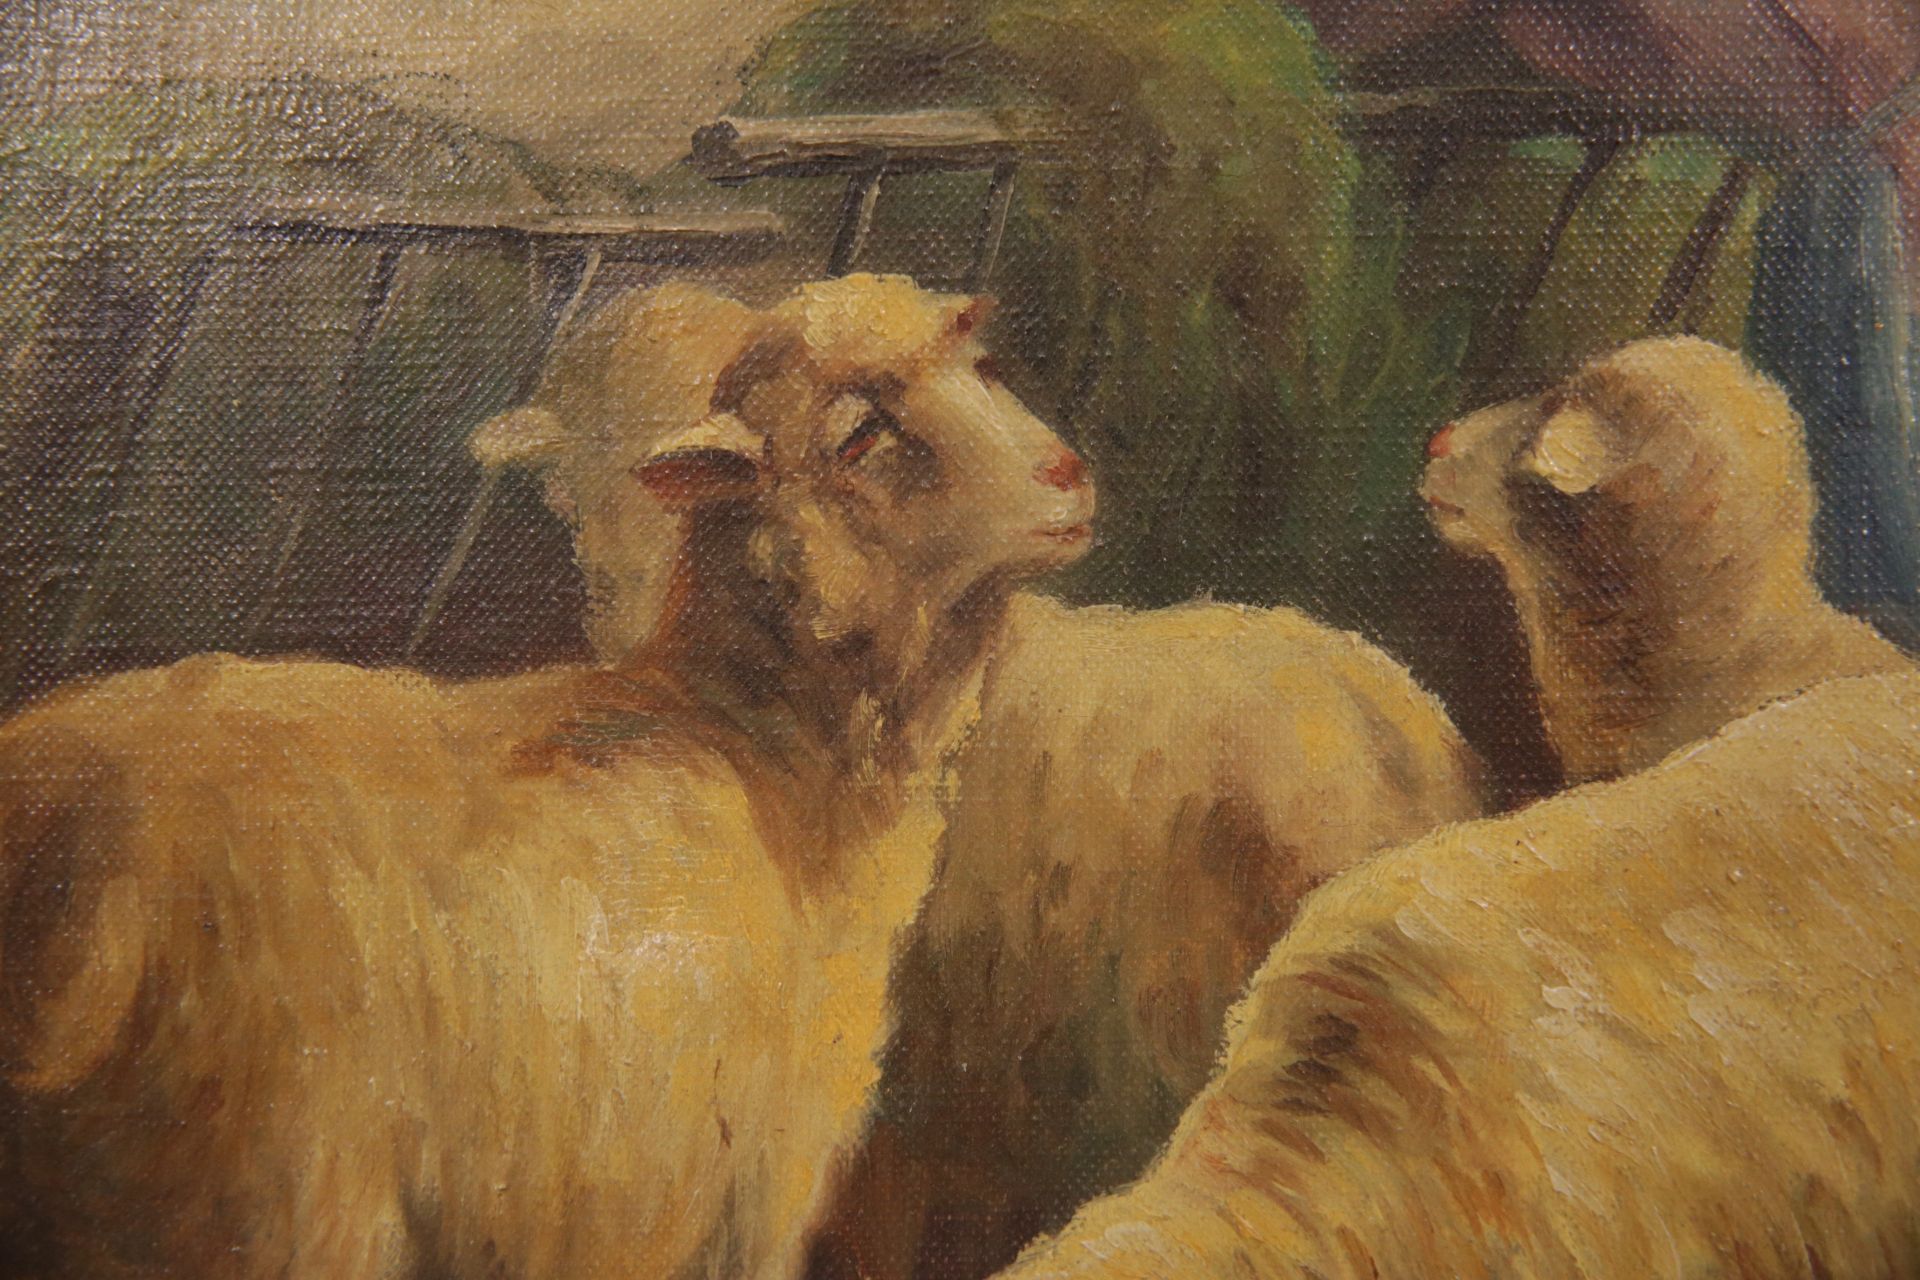 Noel CHARLEY (act.c.1900) "Sheep and shepherdess in the stable", oil on canvas. - Bild 3 aus 4